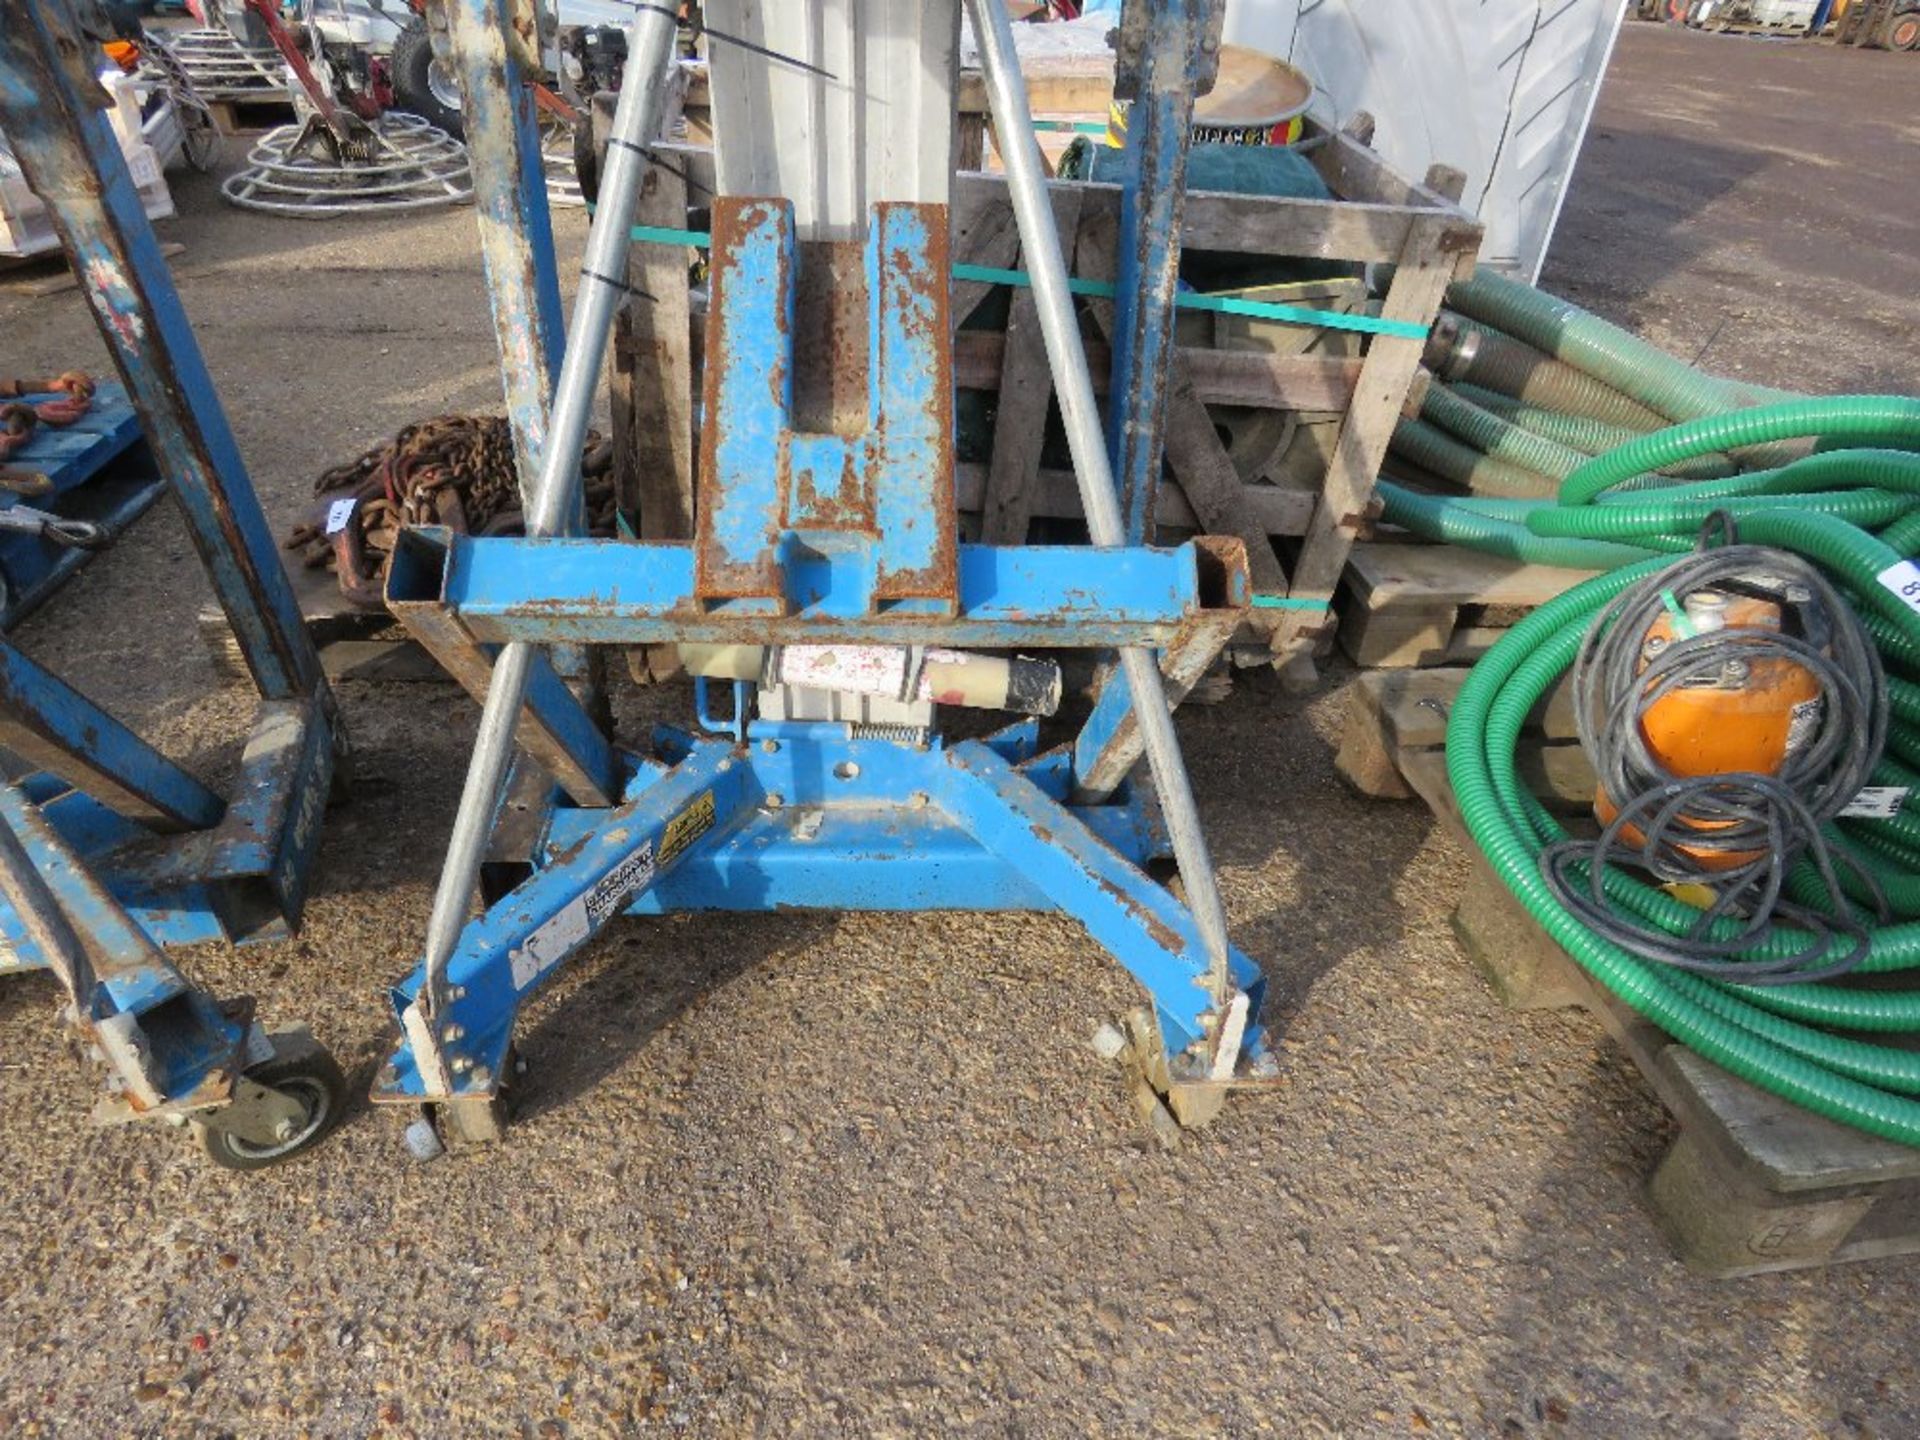 GENIE SLA10 MANUAL OPERTED HOIST / LIFT UNIT WITH FORKS. DIRECT FROM LOCAL COMPANY. - Image 2 of 6